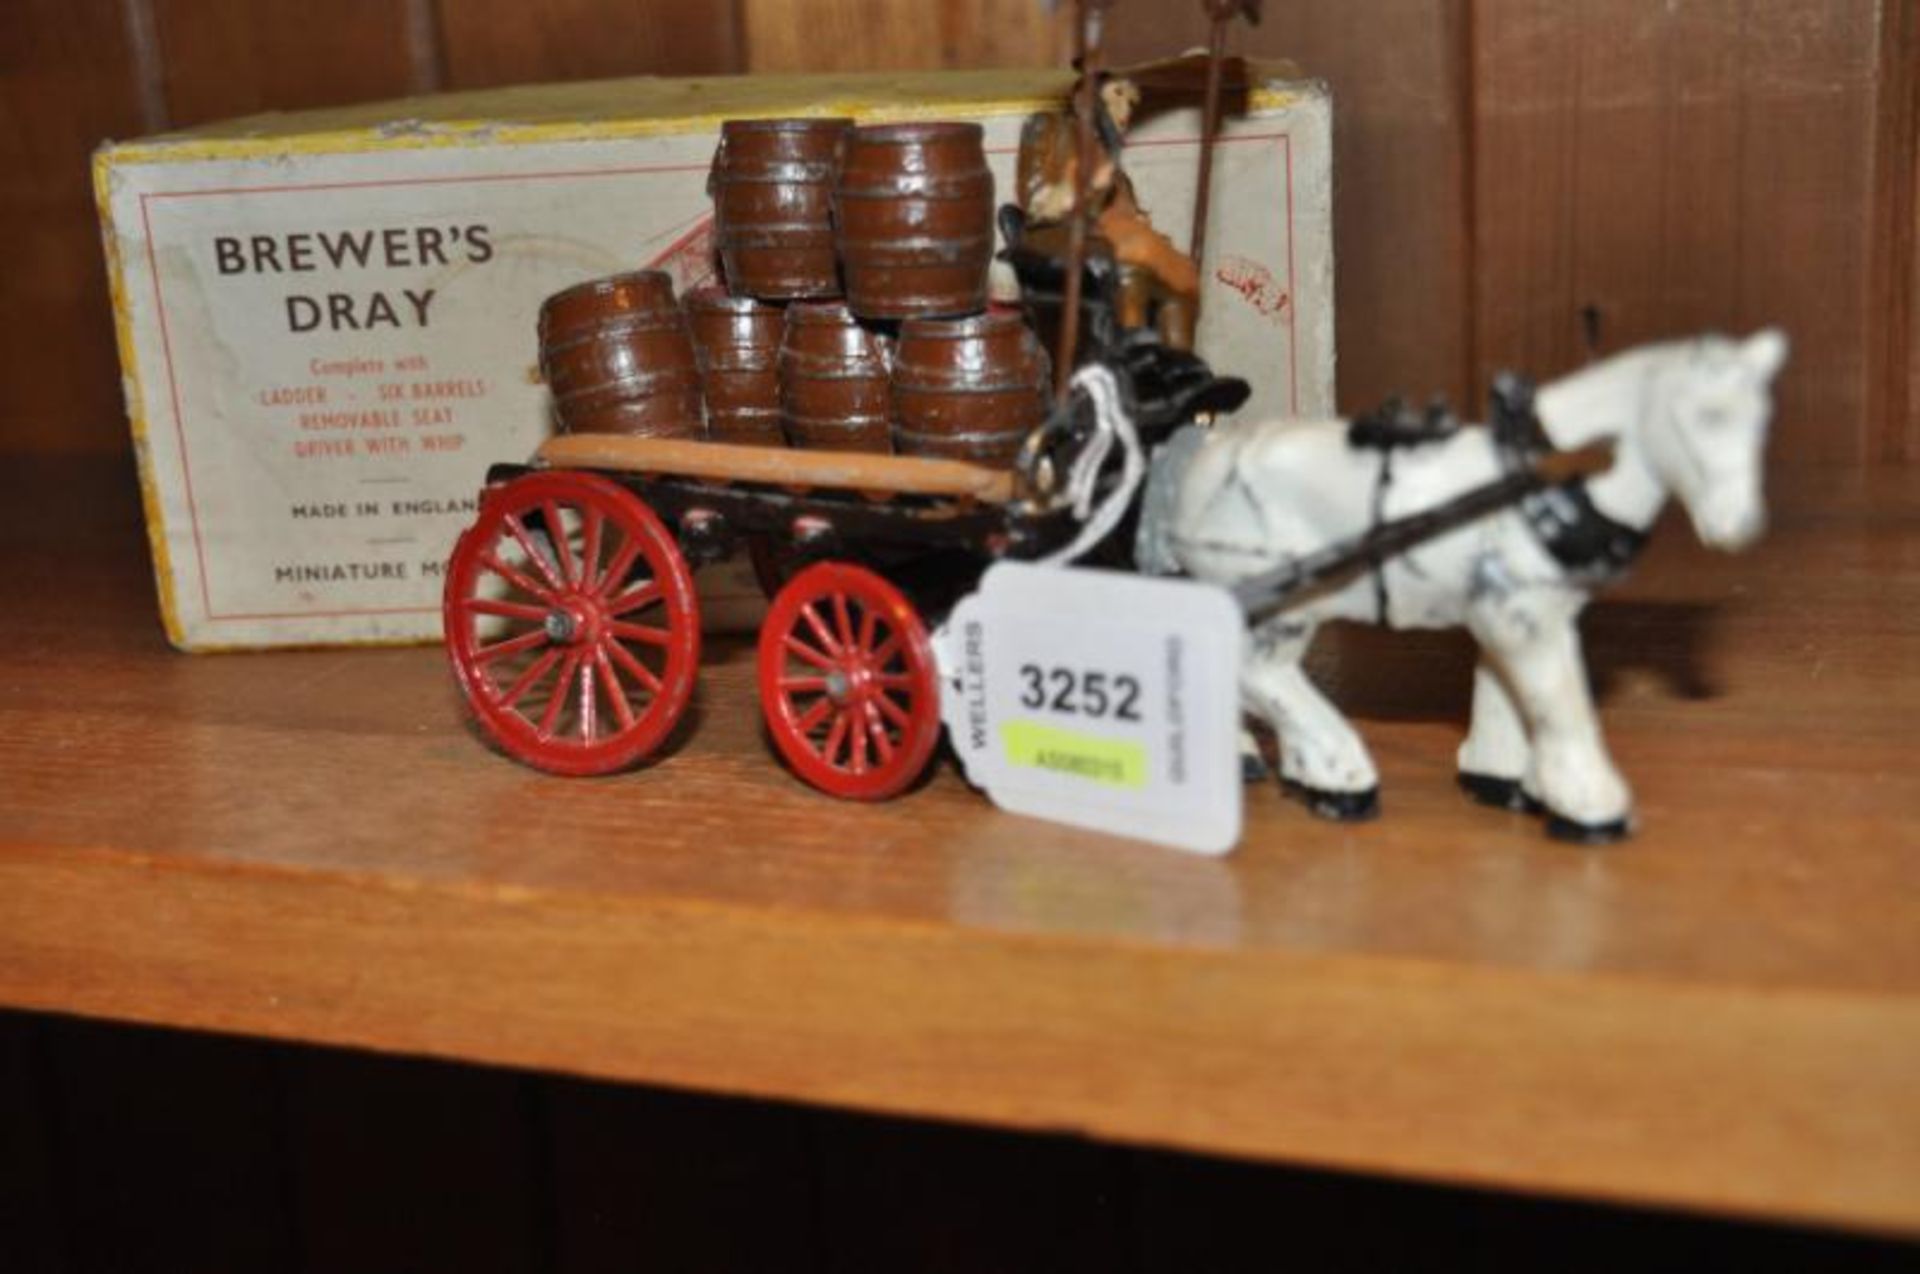 An F G Taylor & Sons brewer's dray, in original box